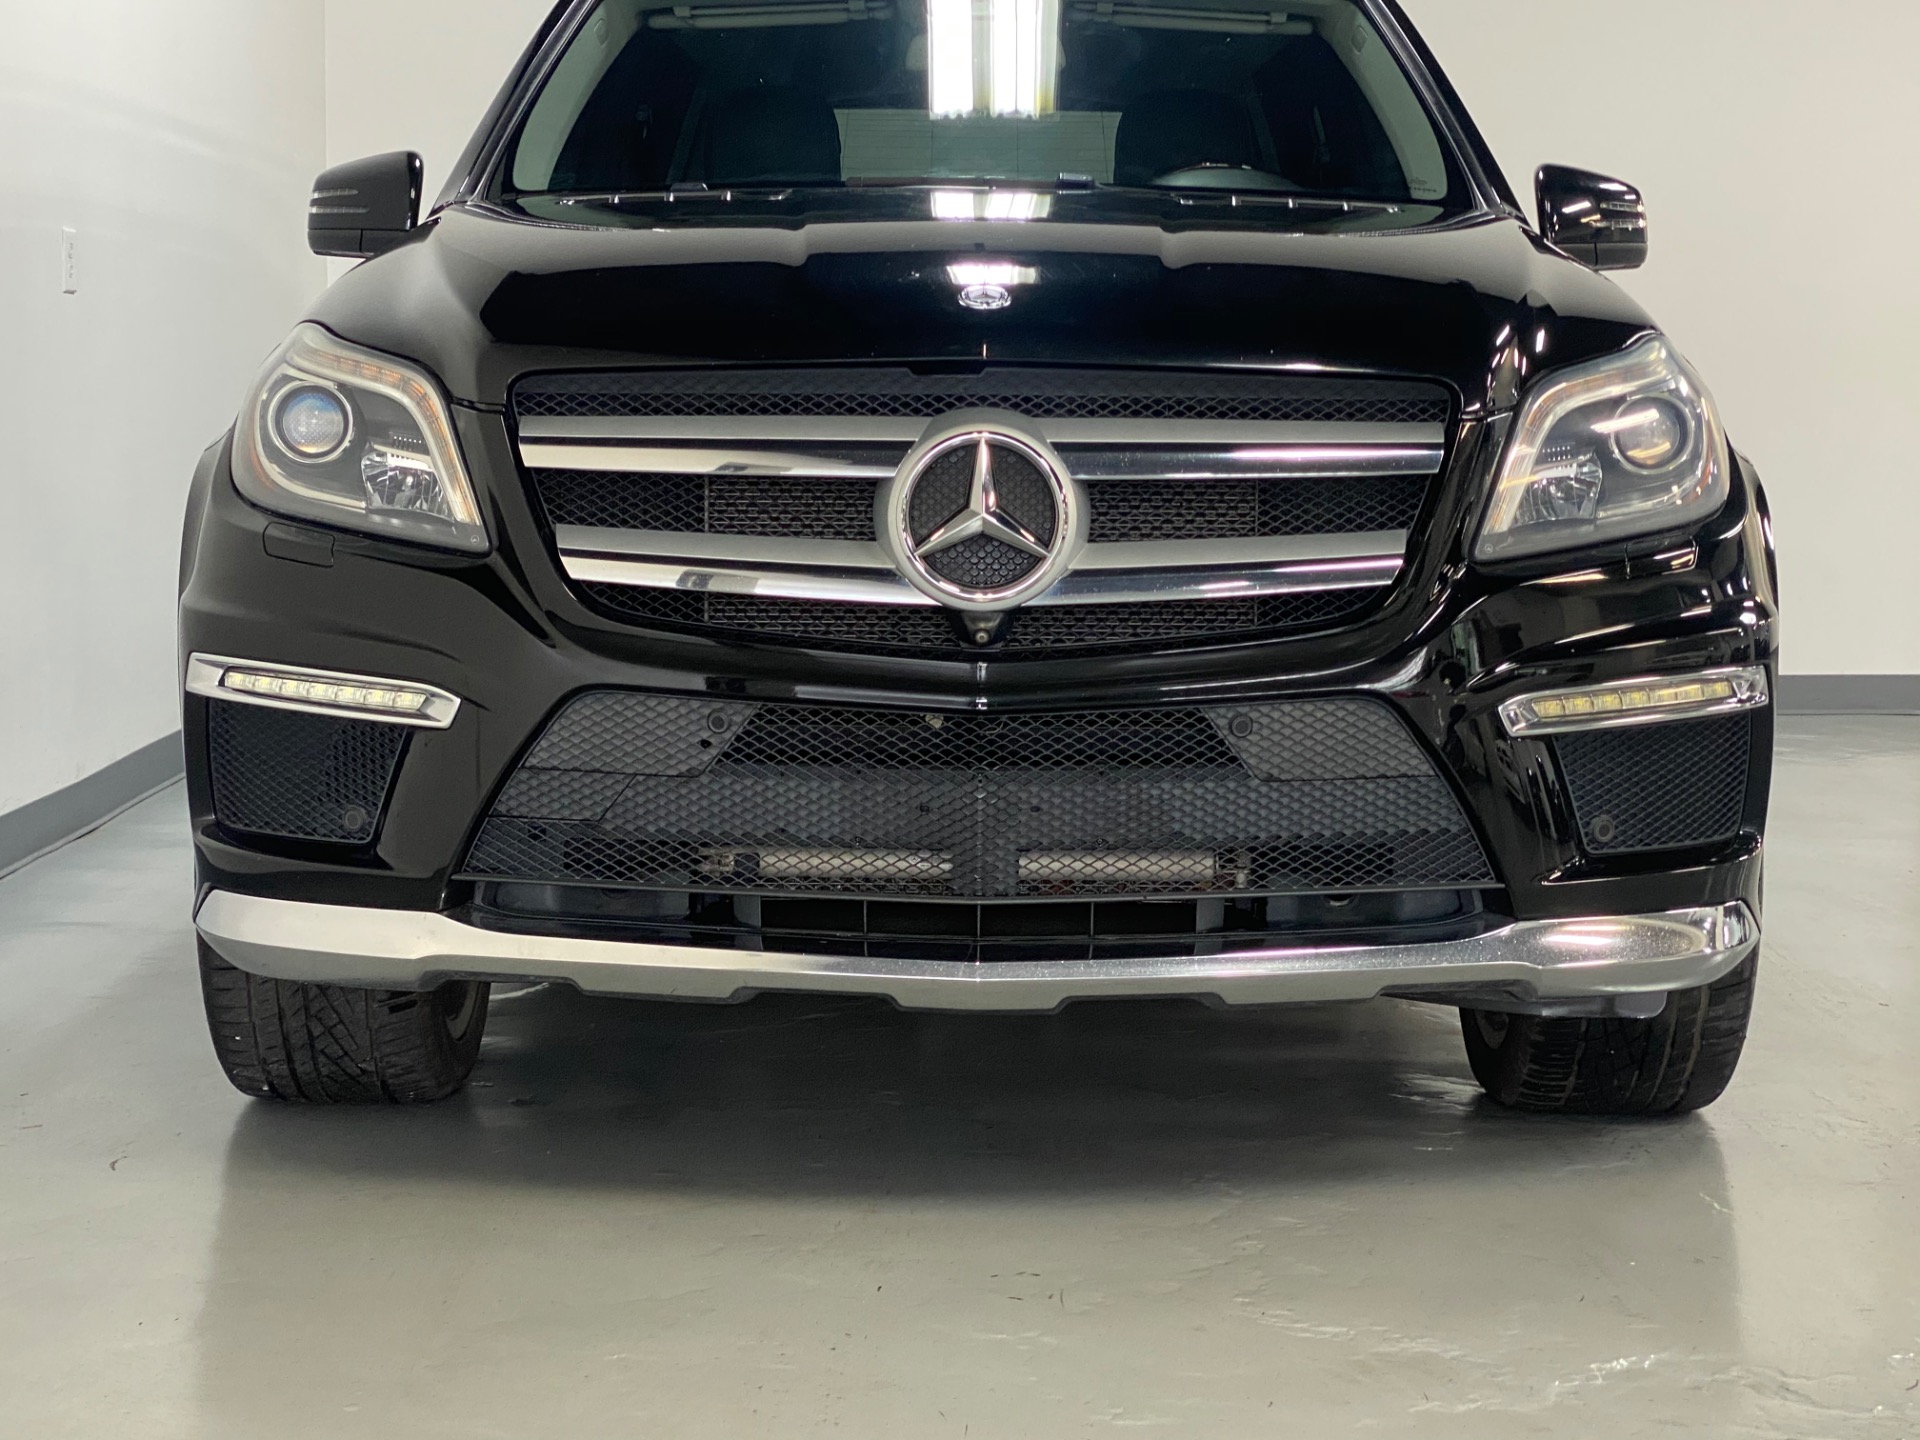 Used 2014 Black Mercedes Benz Gl Class Gl550 Amg Awd Gl 550 4matic For Sale Sold Prime Motorz Stock 2956